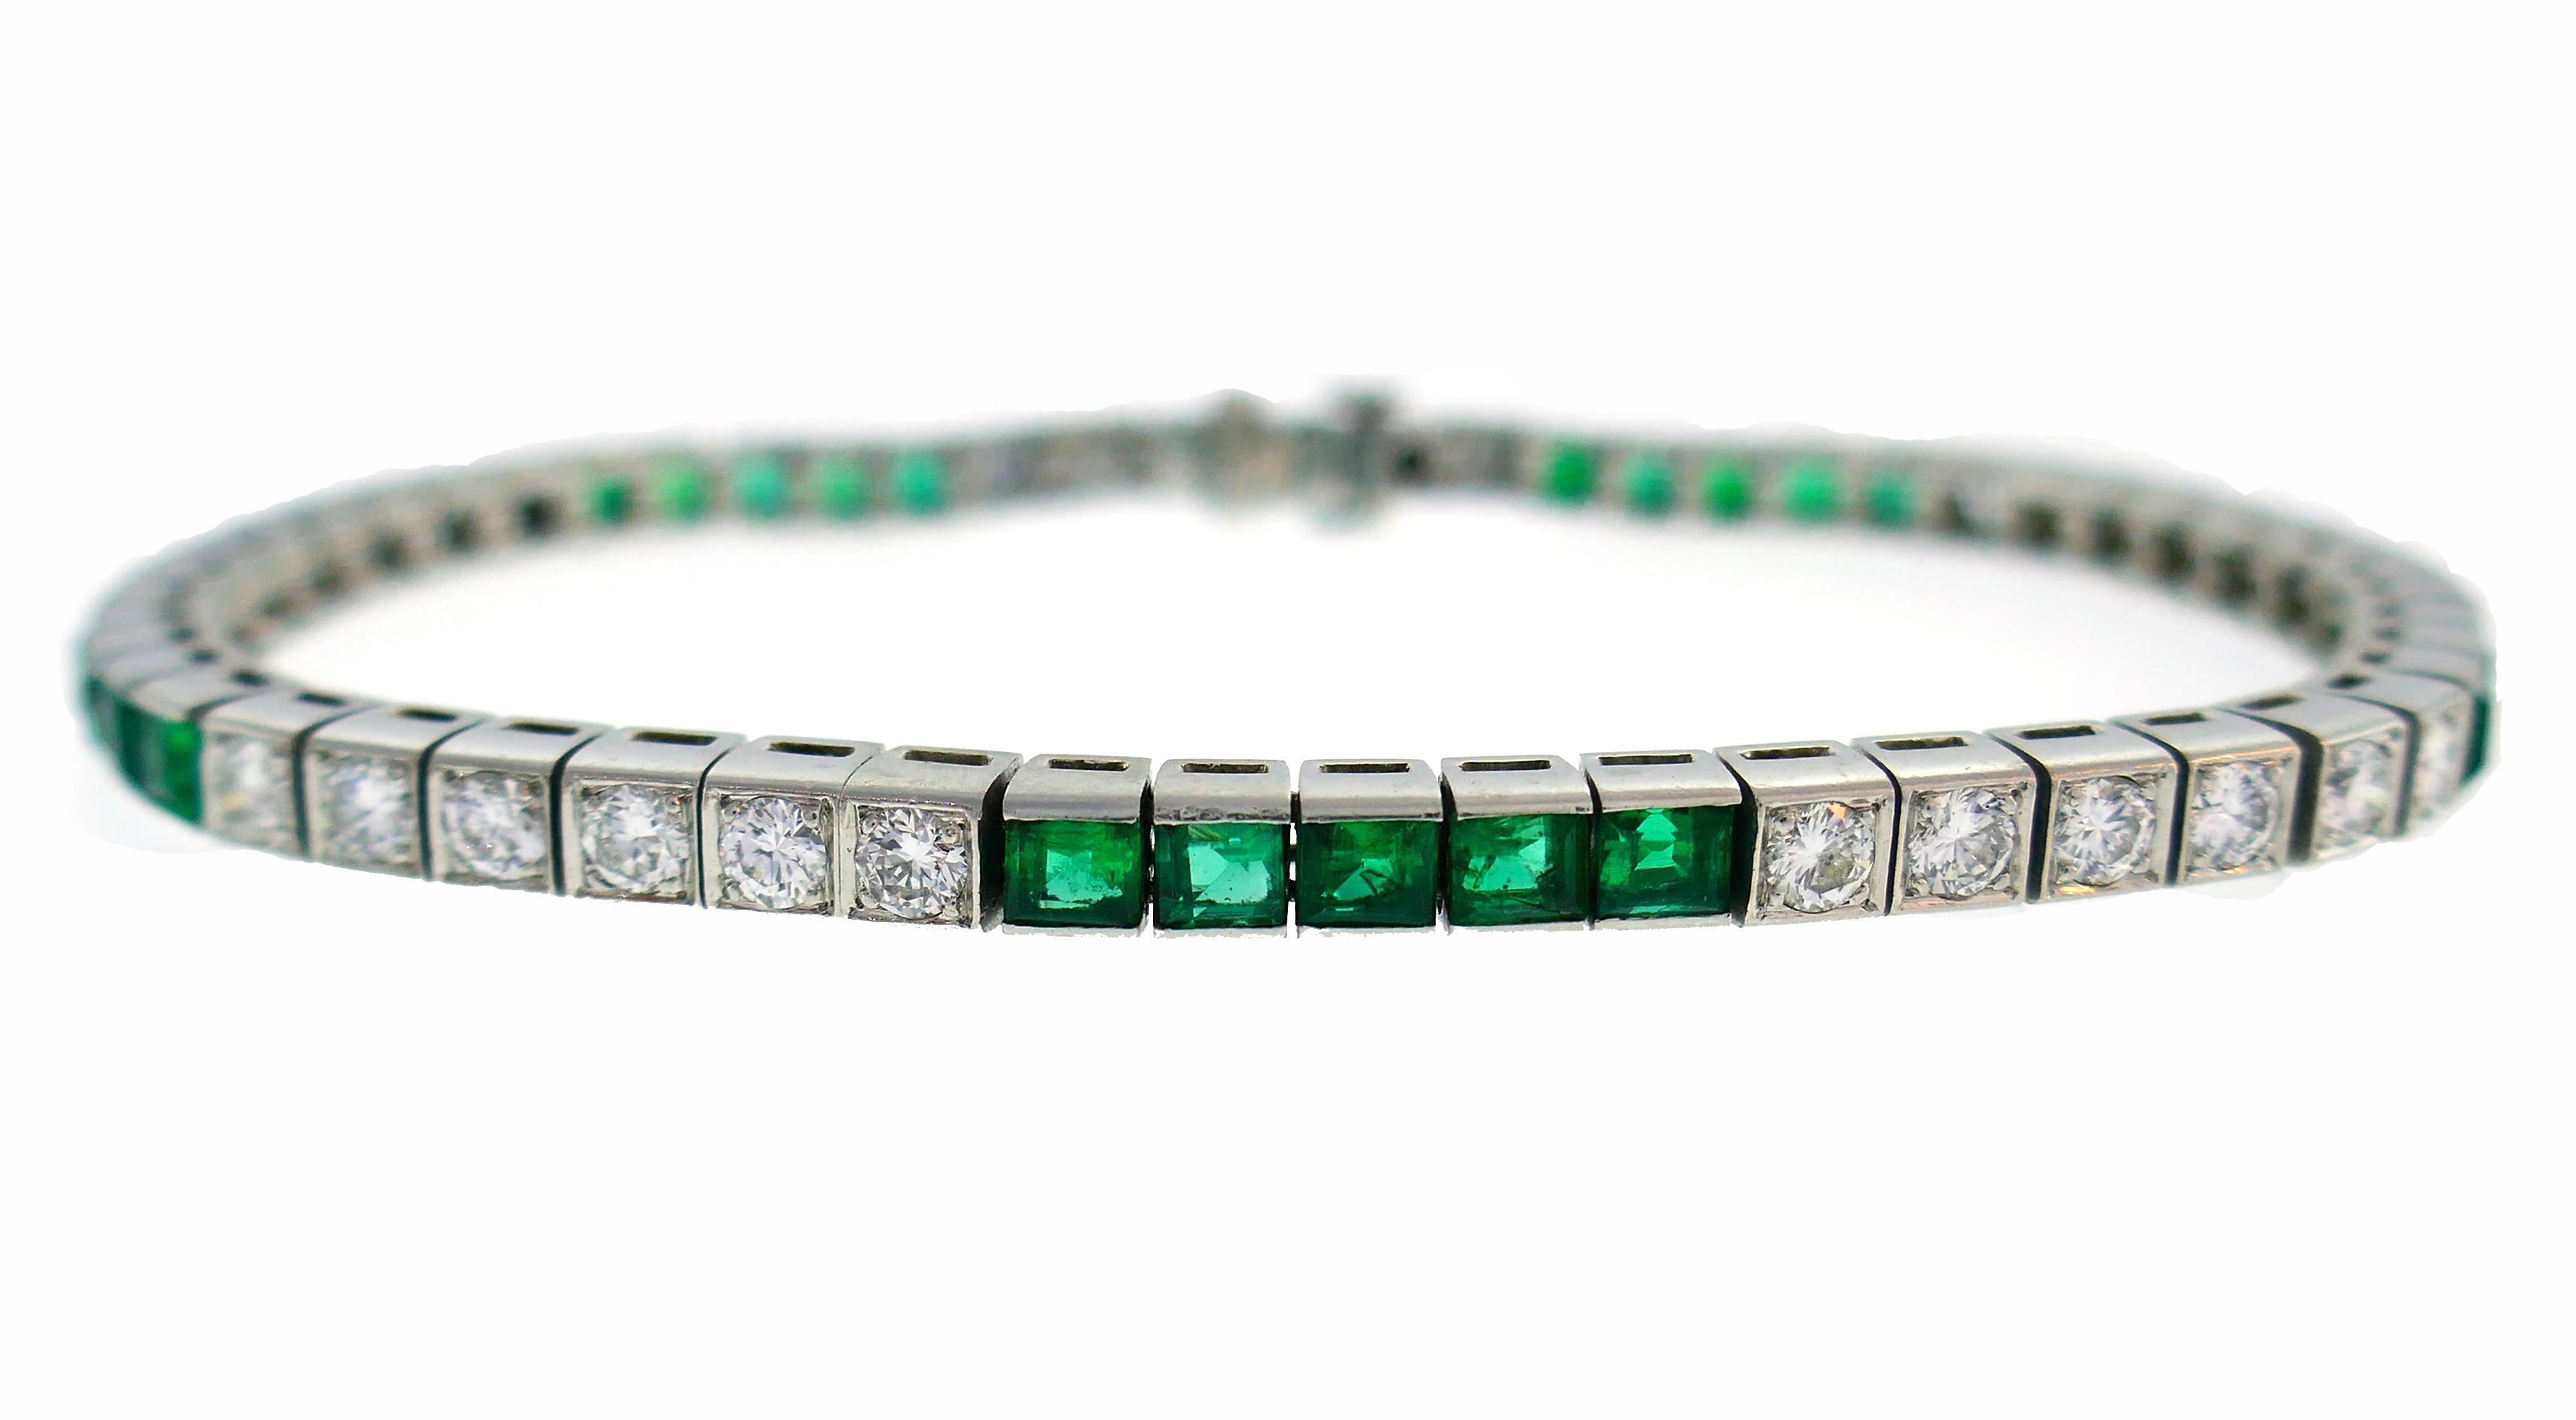 Mixed Cut Tiffany & Co. Platinum Tennis Line Bracelet with Diamond and Emerald, 1960s